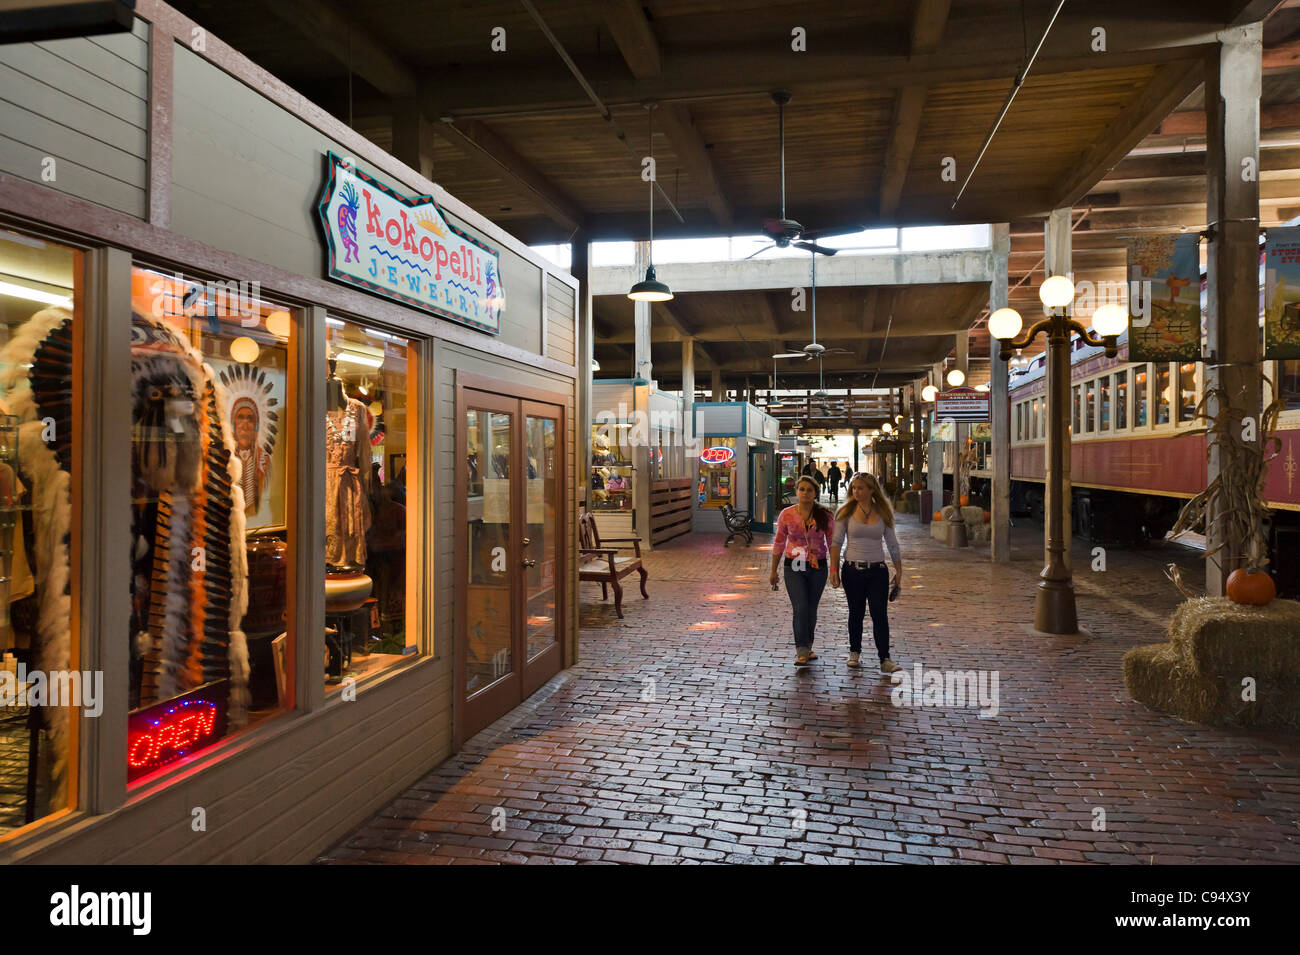 Shops in Stockyards Station on Exchange Avenue, Stockyards District, Fort Worth, Texas, USA Stock Photo